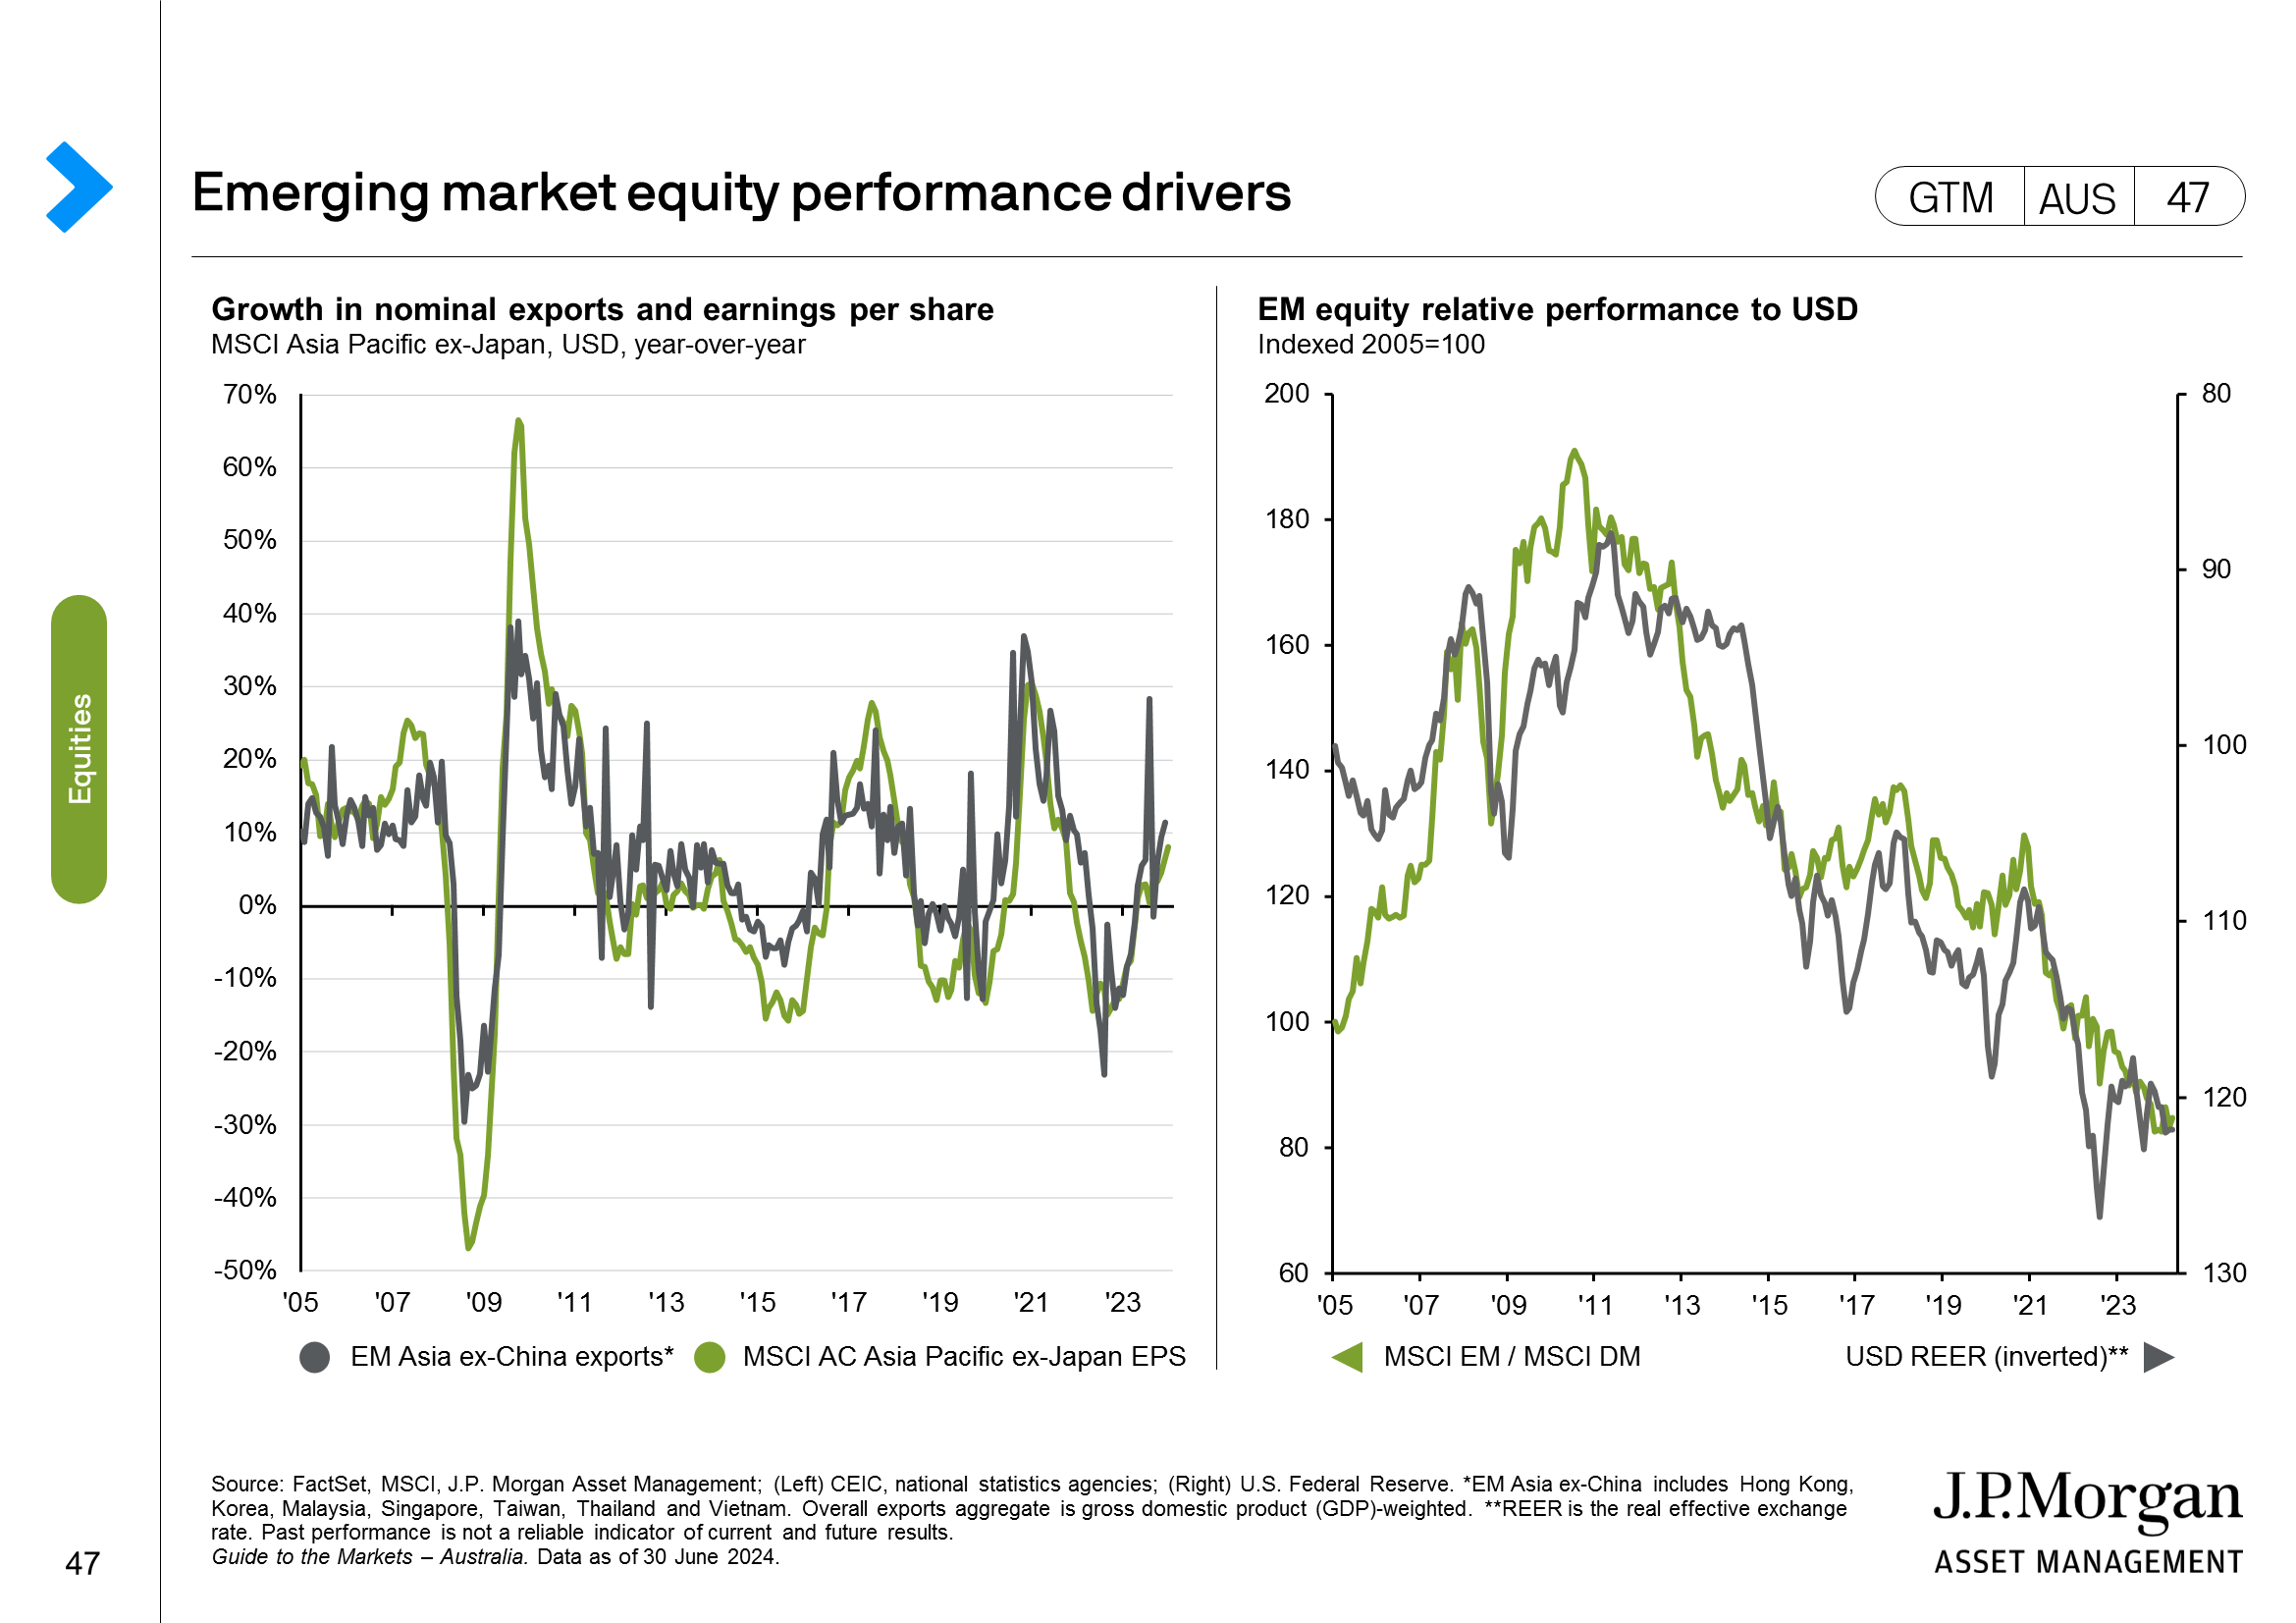 Emerging market equity valuations and returns